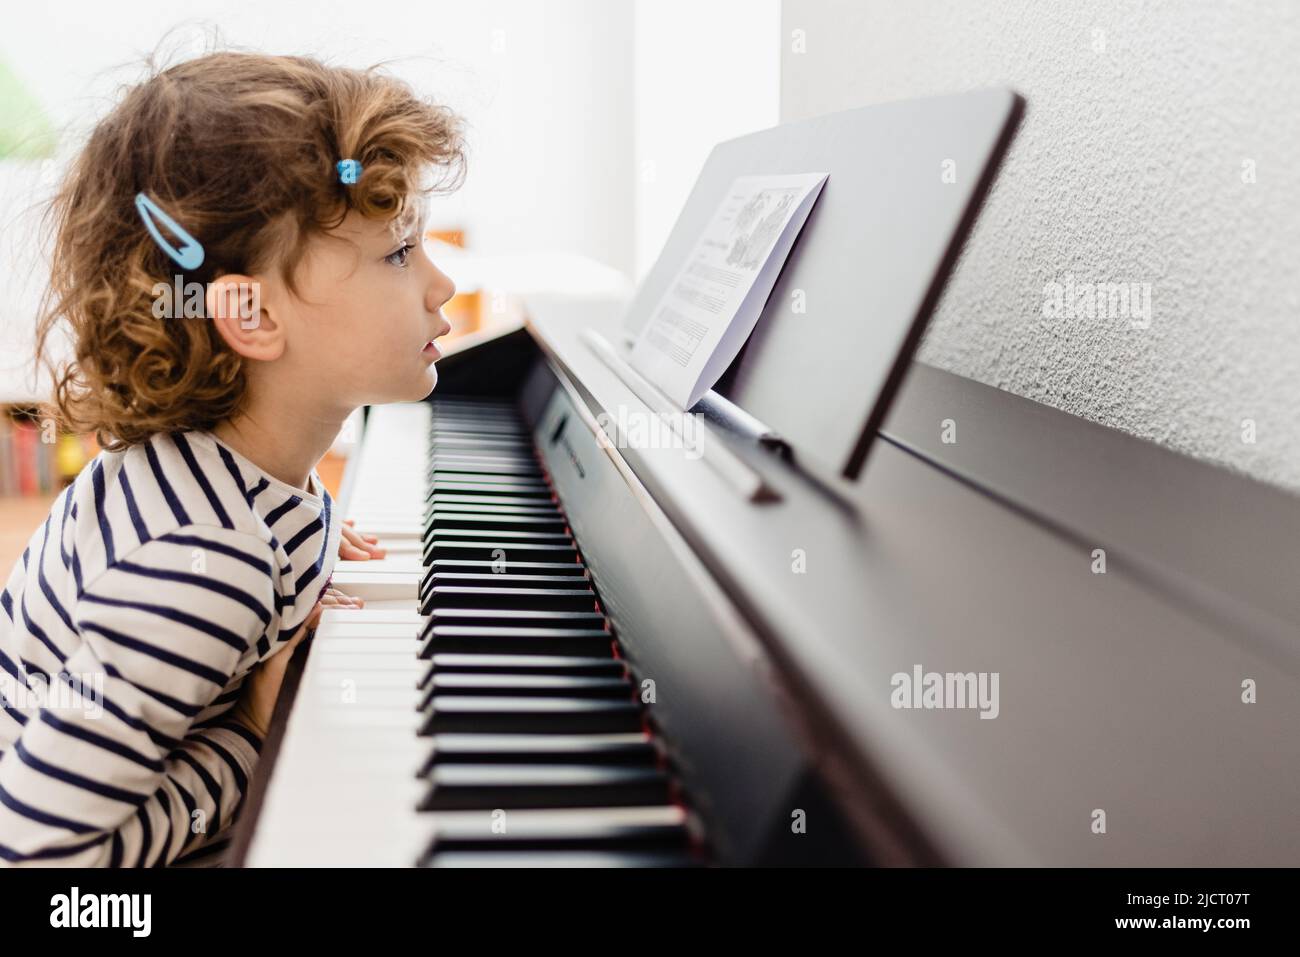 Pretty 3-year-old girl plays the keys of a piano and reads the sheet music with difficulty. Stock Photo